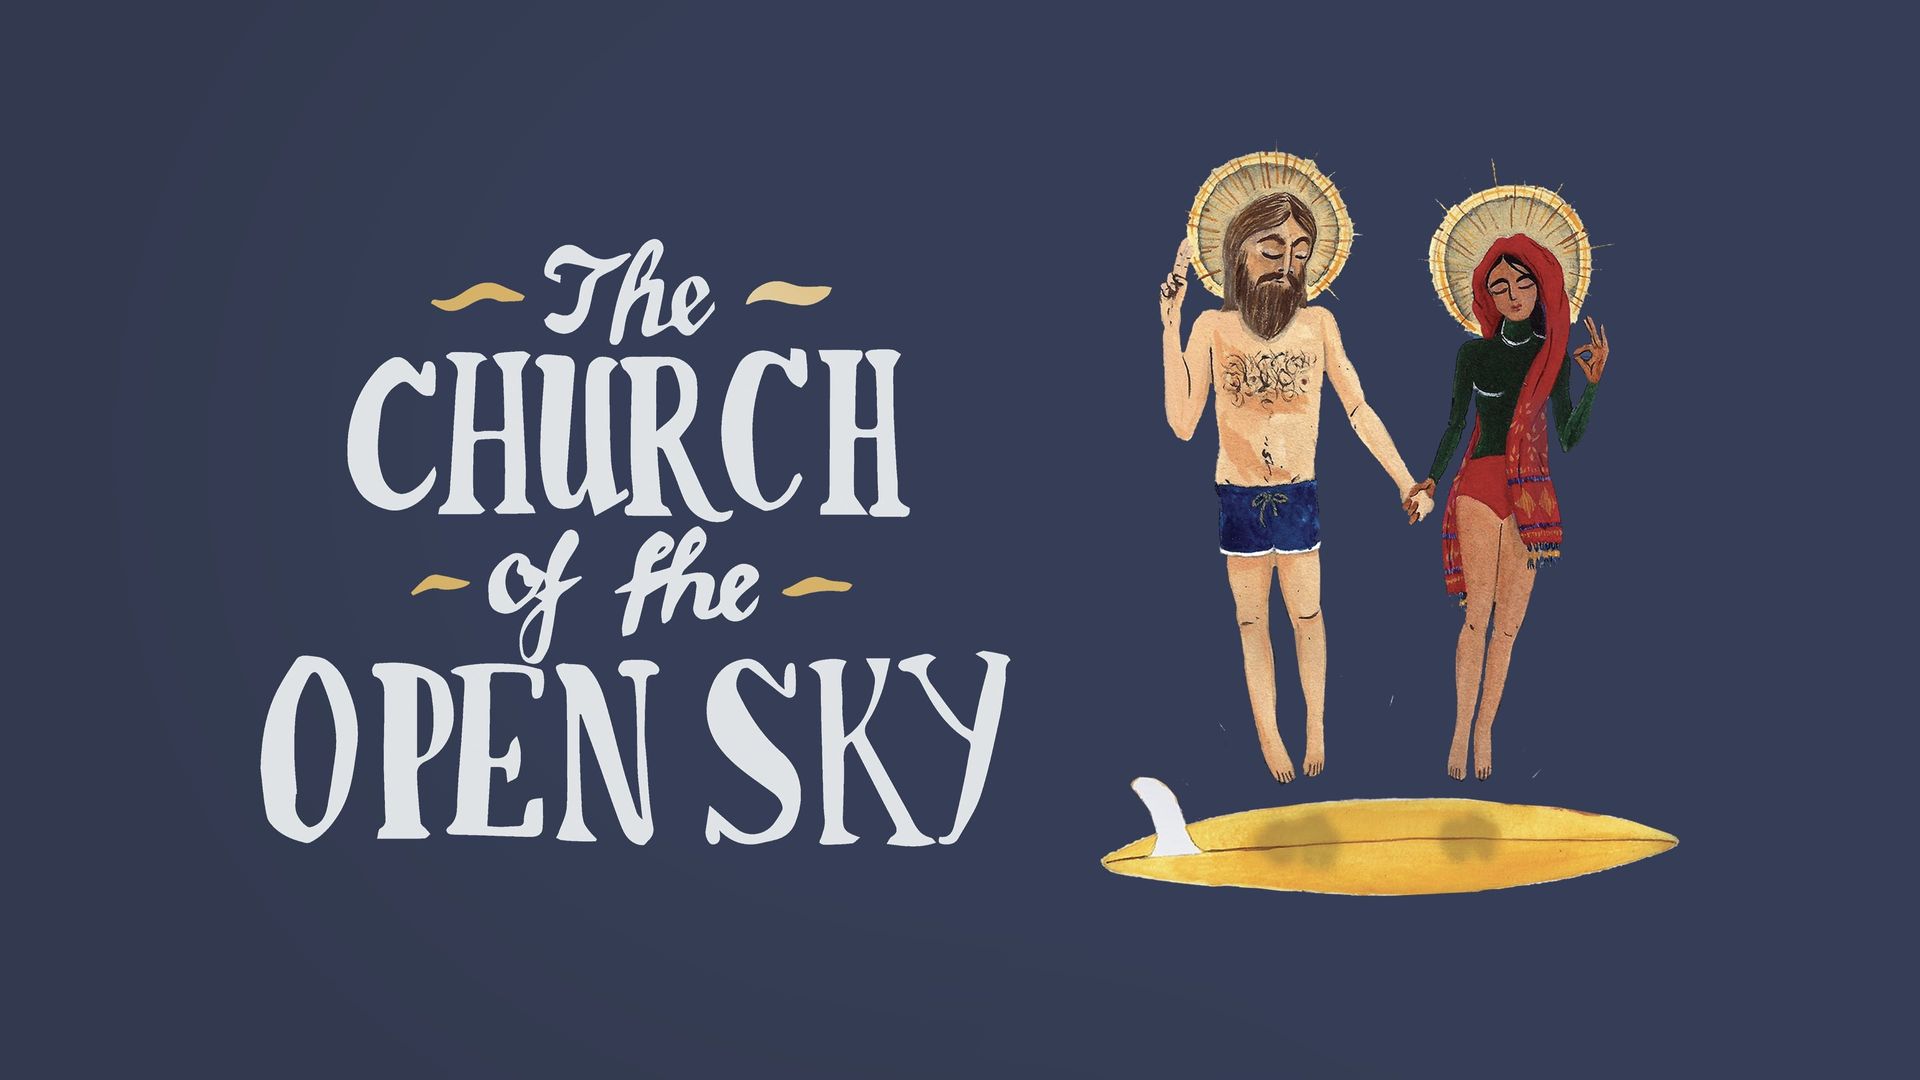 The Church of the Open Sky background